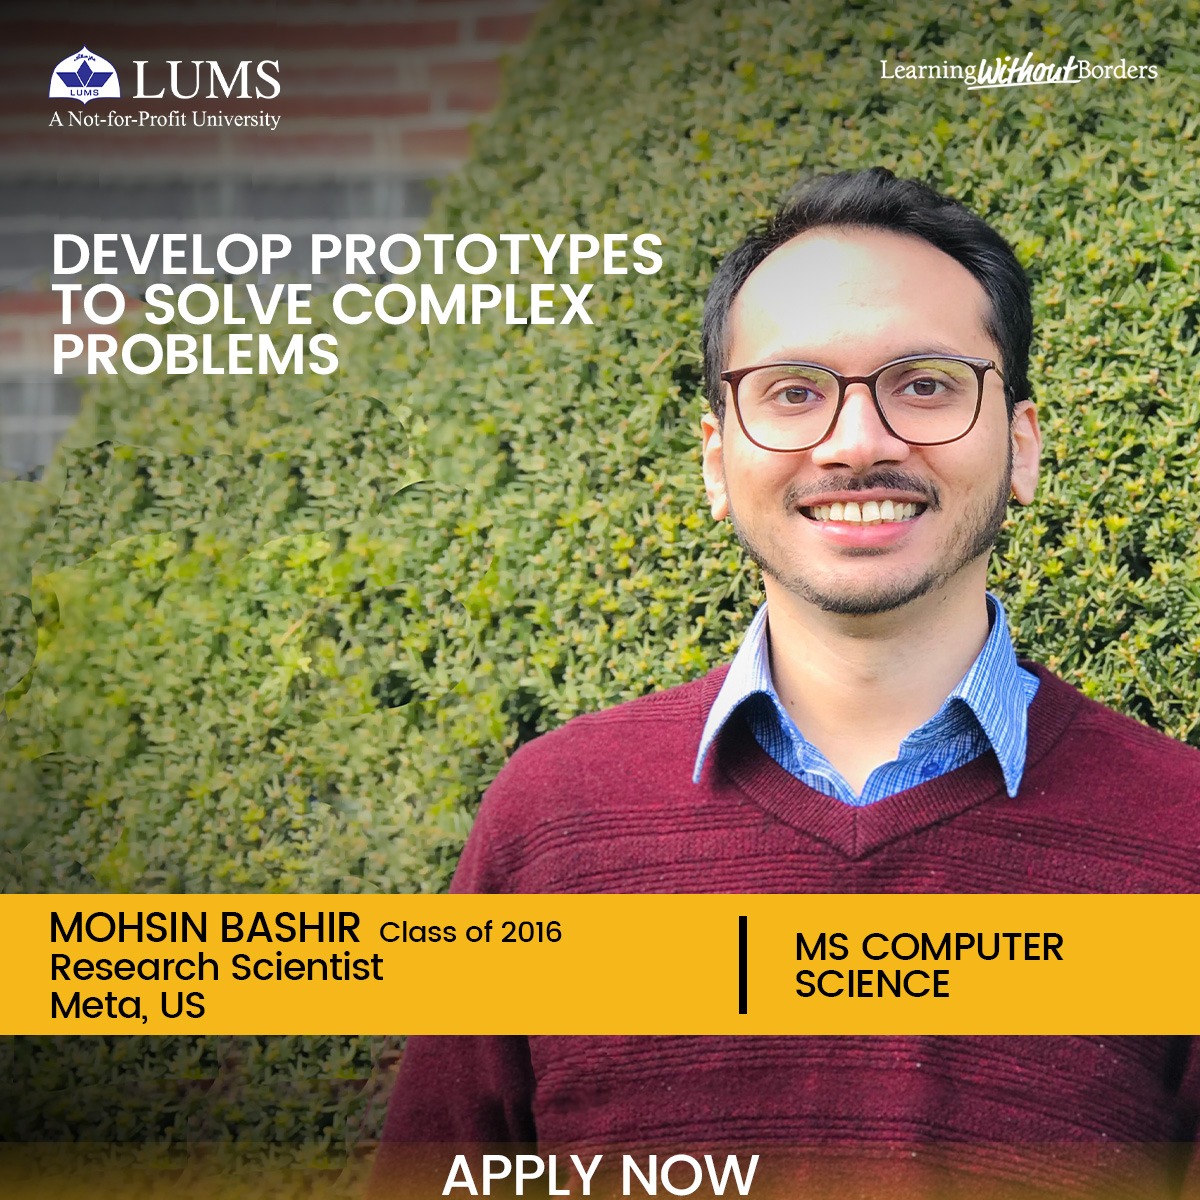 The MS Computer Science graduates from @sbasselums have secured prestigious positions in top tech companies & academia, showcasing the unparalleled opportunities awaiting you. Apply now to advance your career in technology! bit.ly/41gZhNI #LearningWithoutBorders